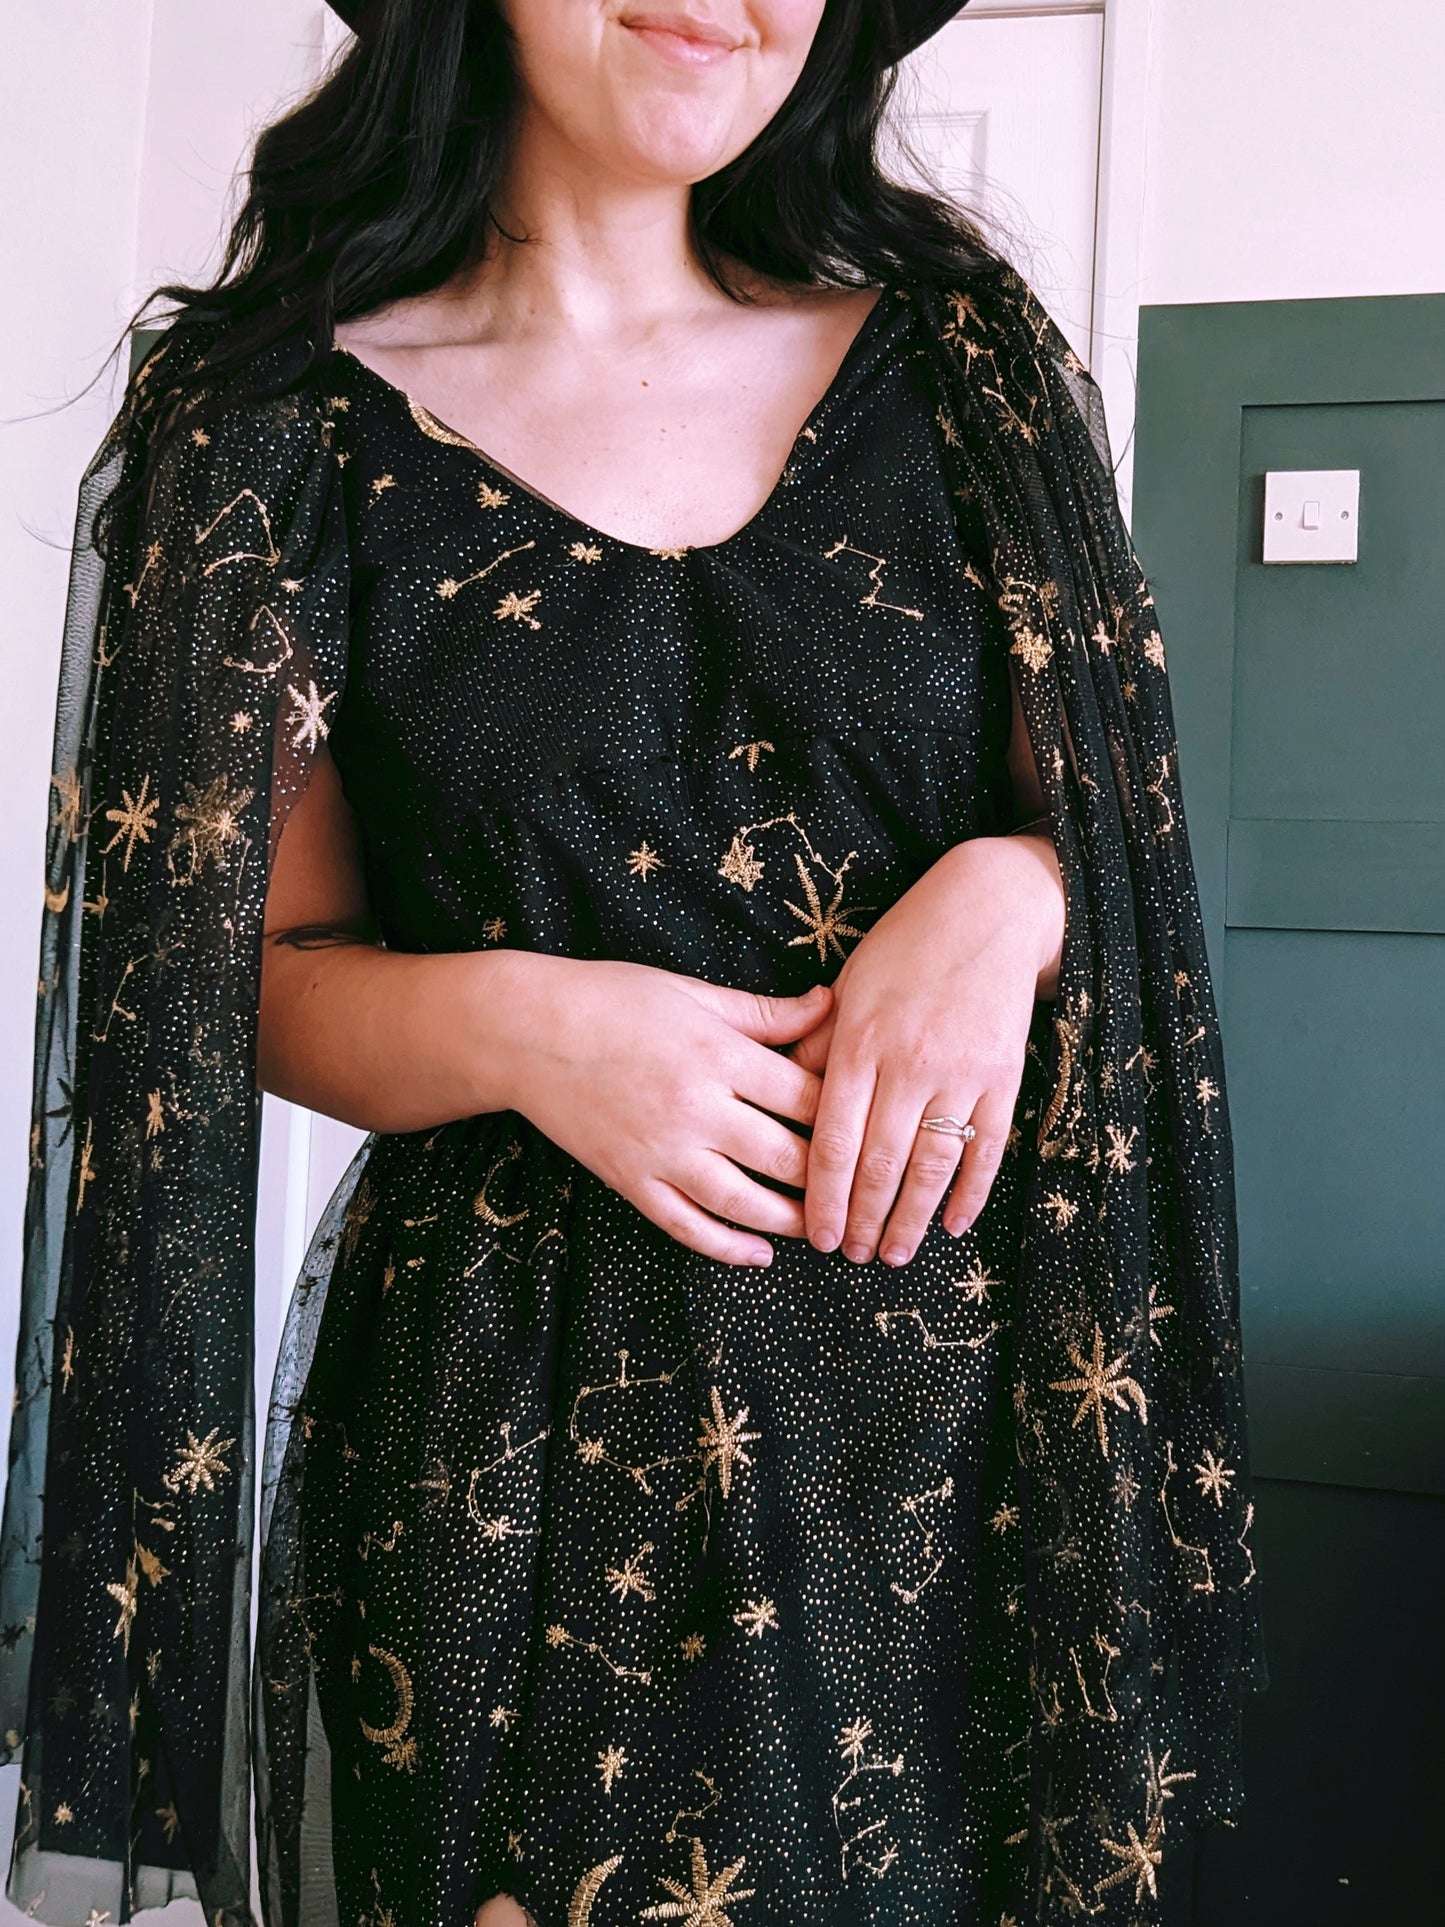 The Black Celestial Out-Out by Leveret Dress